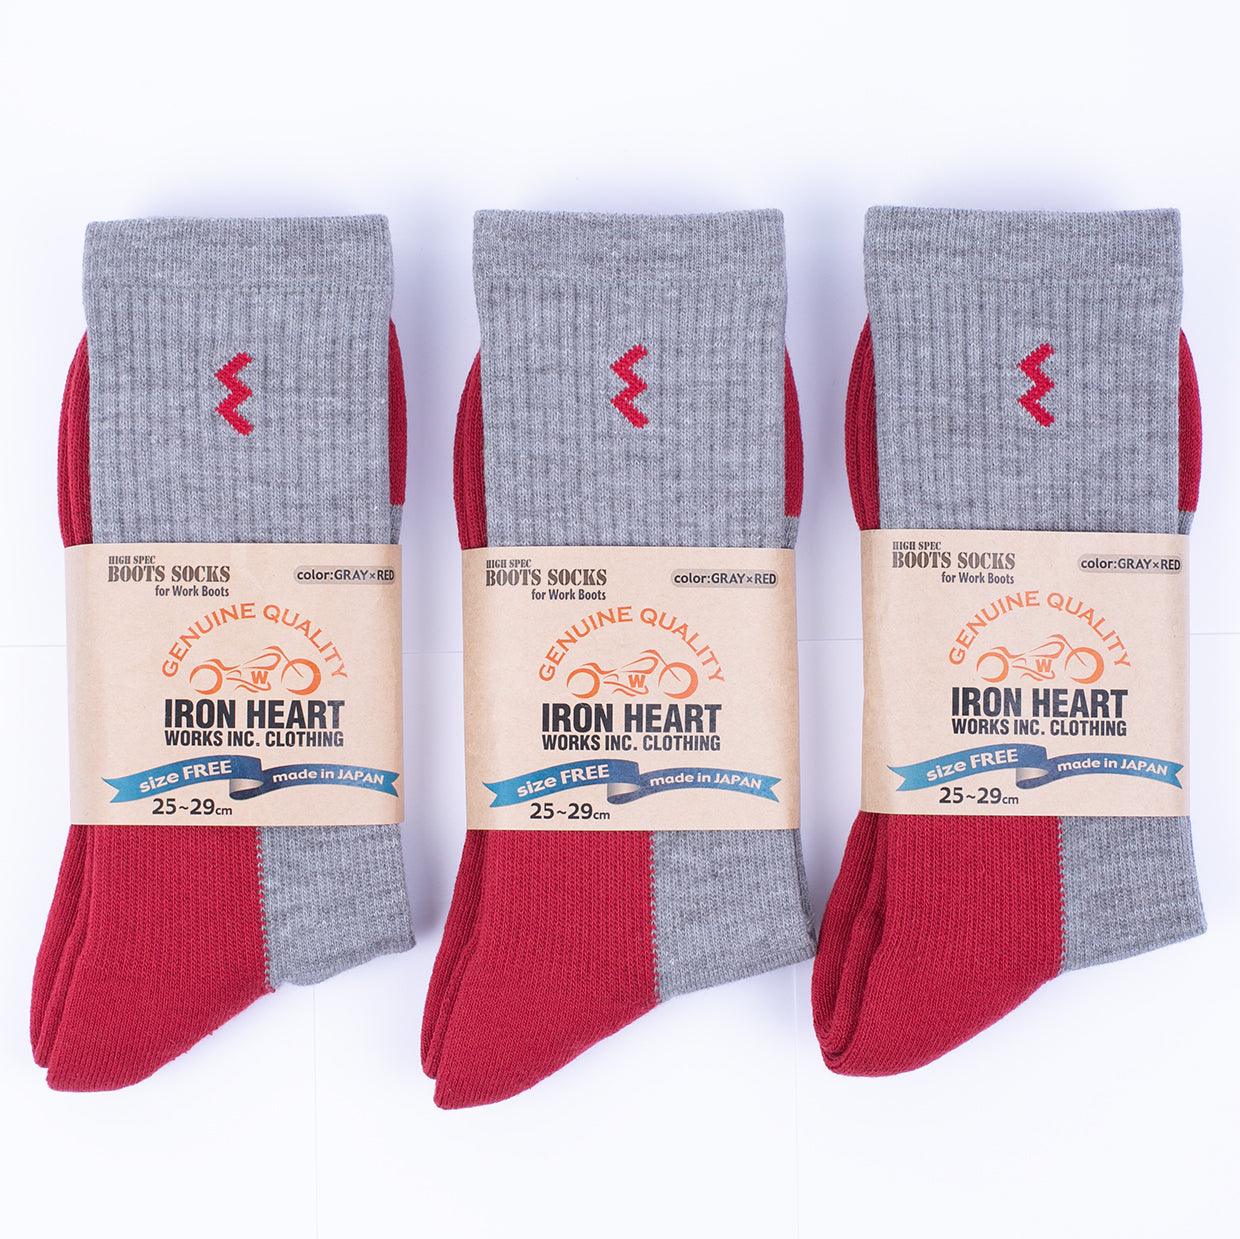 Image showing the IHG-030/3-GRYRED - 3-Pack Iron Heart Work Boot Socks - Grey/Red which is a Socks described by the following info Accessories, Iron Heart, Released, Socks and sold on the IRON HEART GERMANY online store